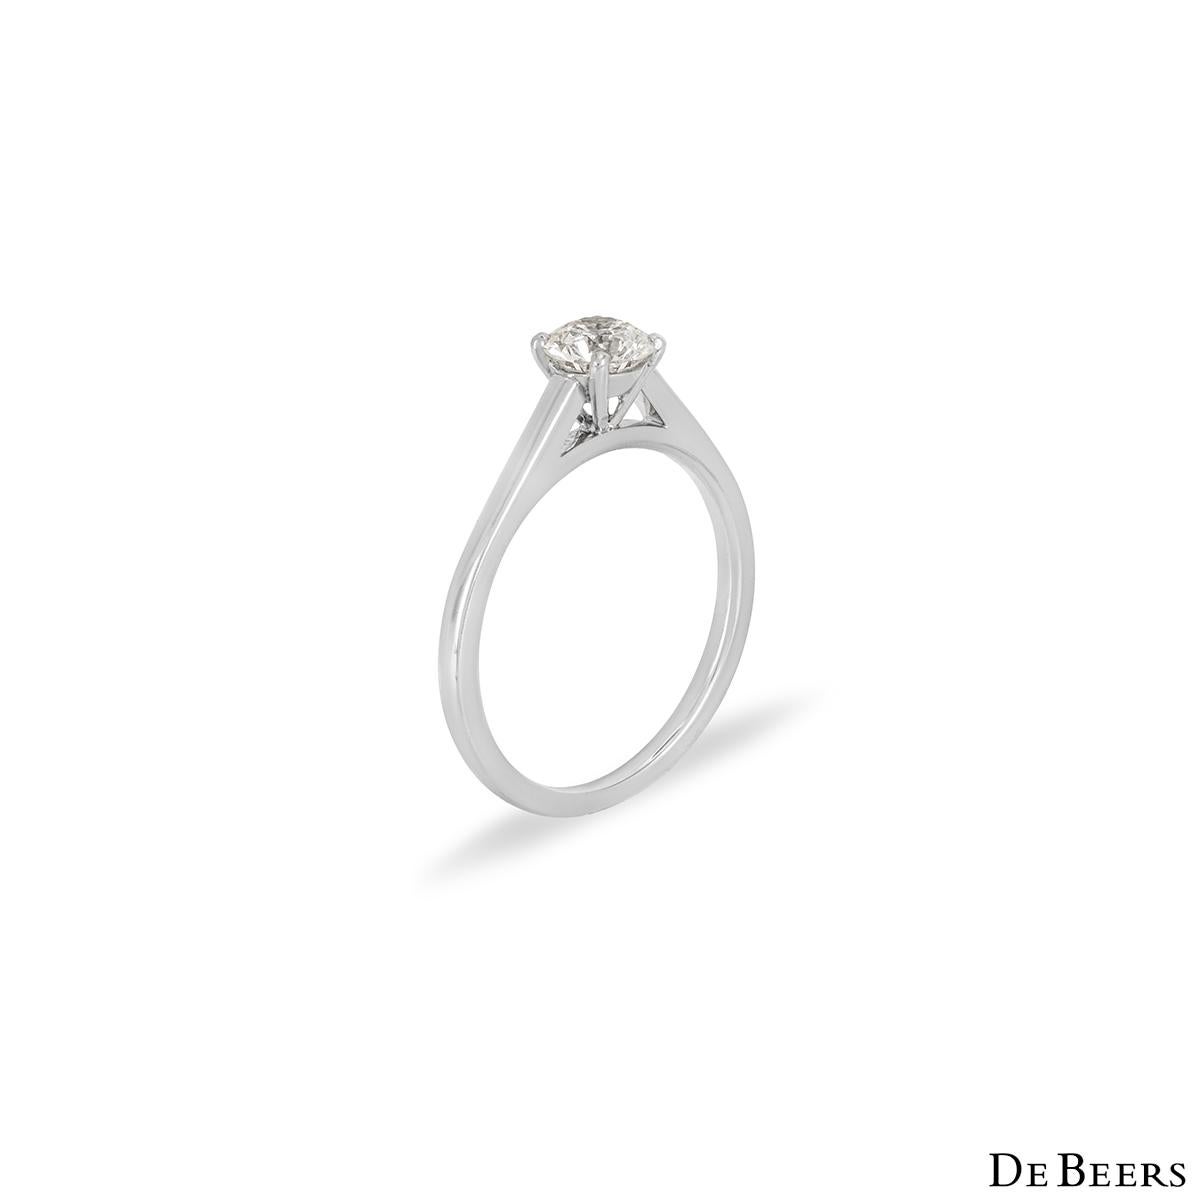 A stunning platinum diamond ring by De Beers from the Classic Collection. The ring features a round brilliant cut diamond within a four claw setting with a weight of 0.52ct, H in colour and VS1 clarity. The ring is a size UK K½ - EU 50½ - US 5 1/2